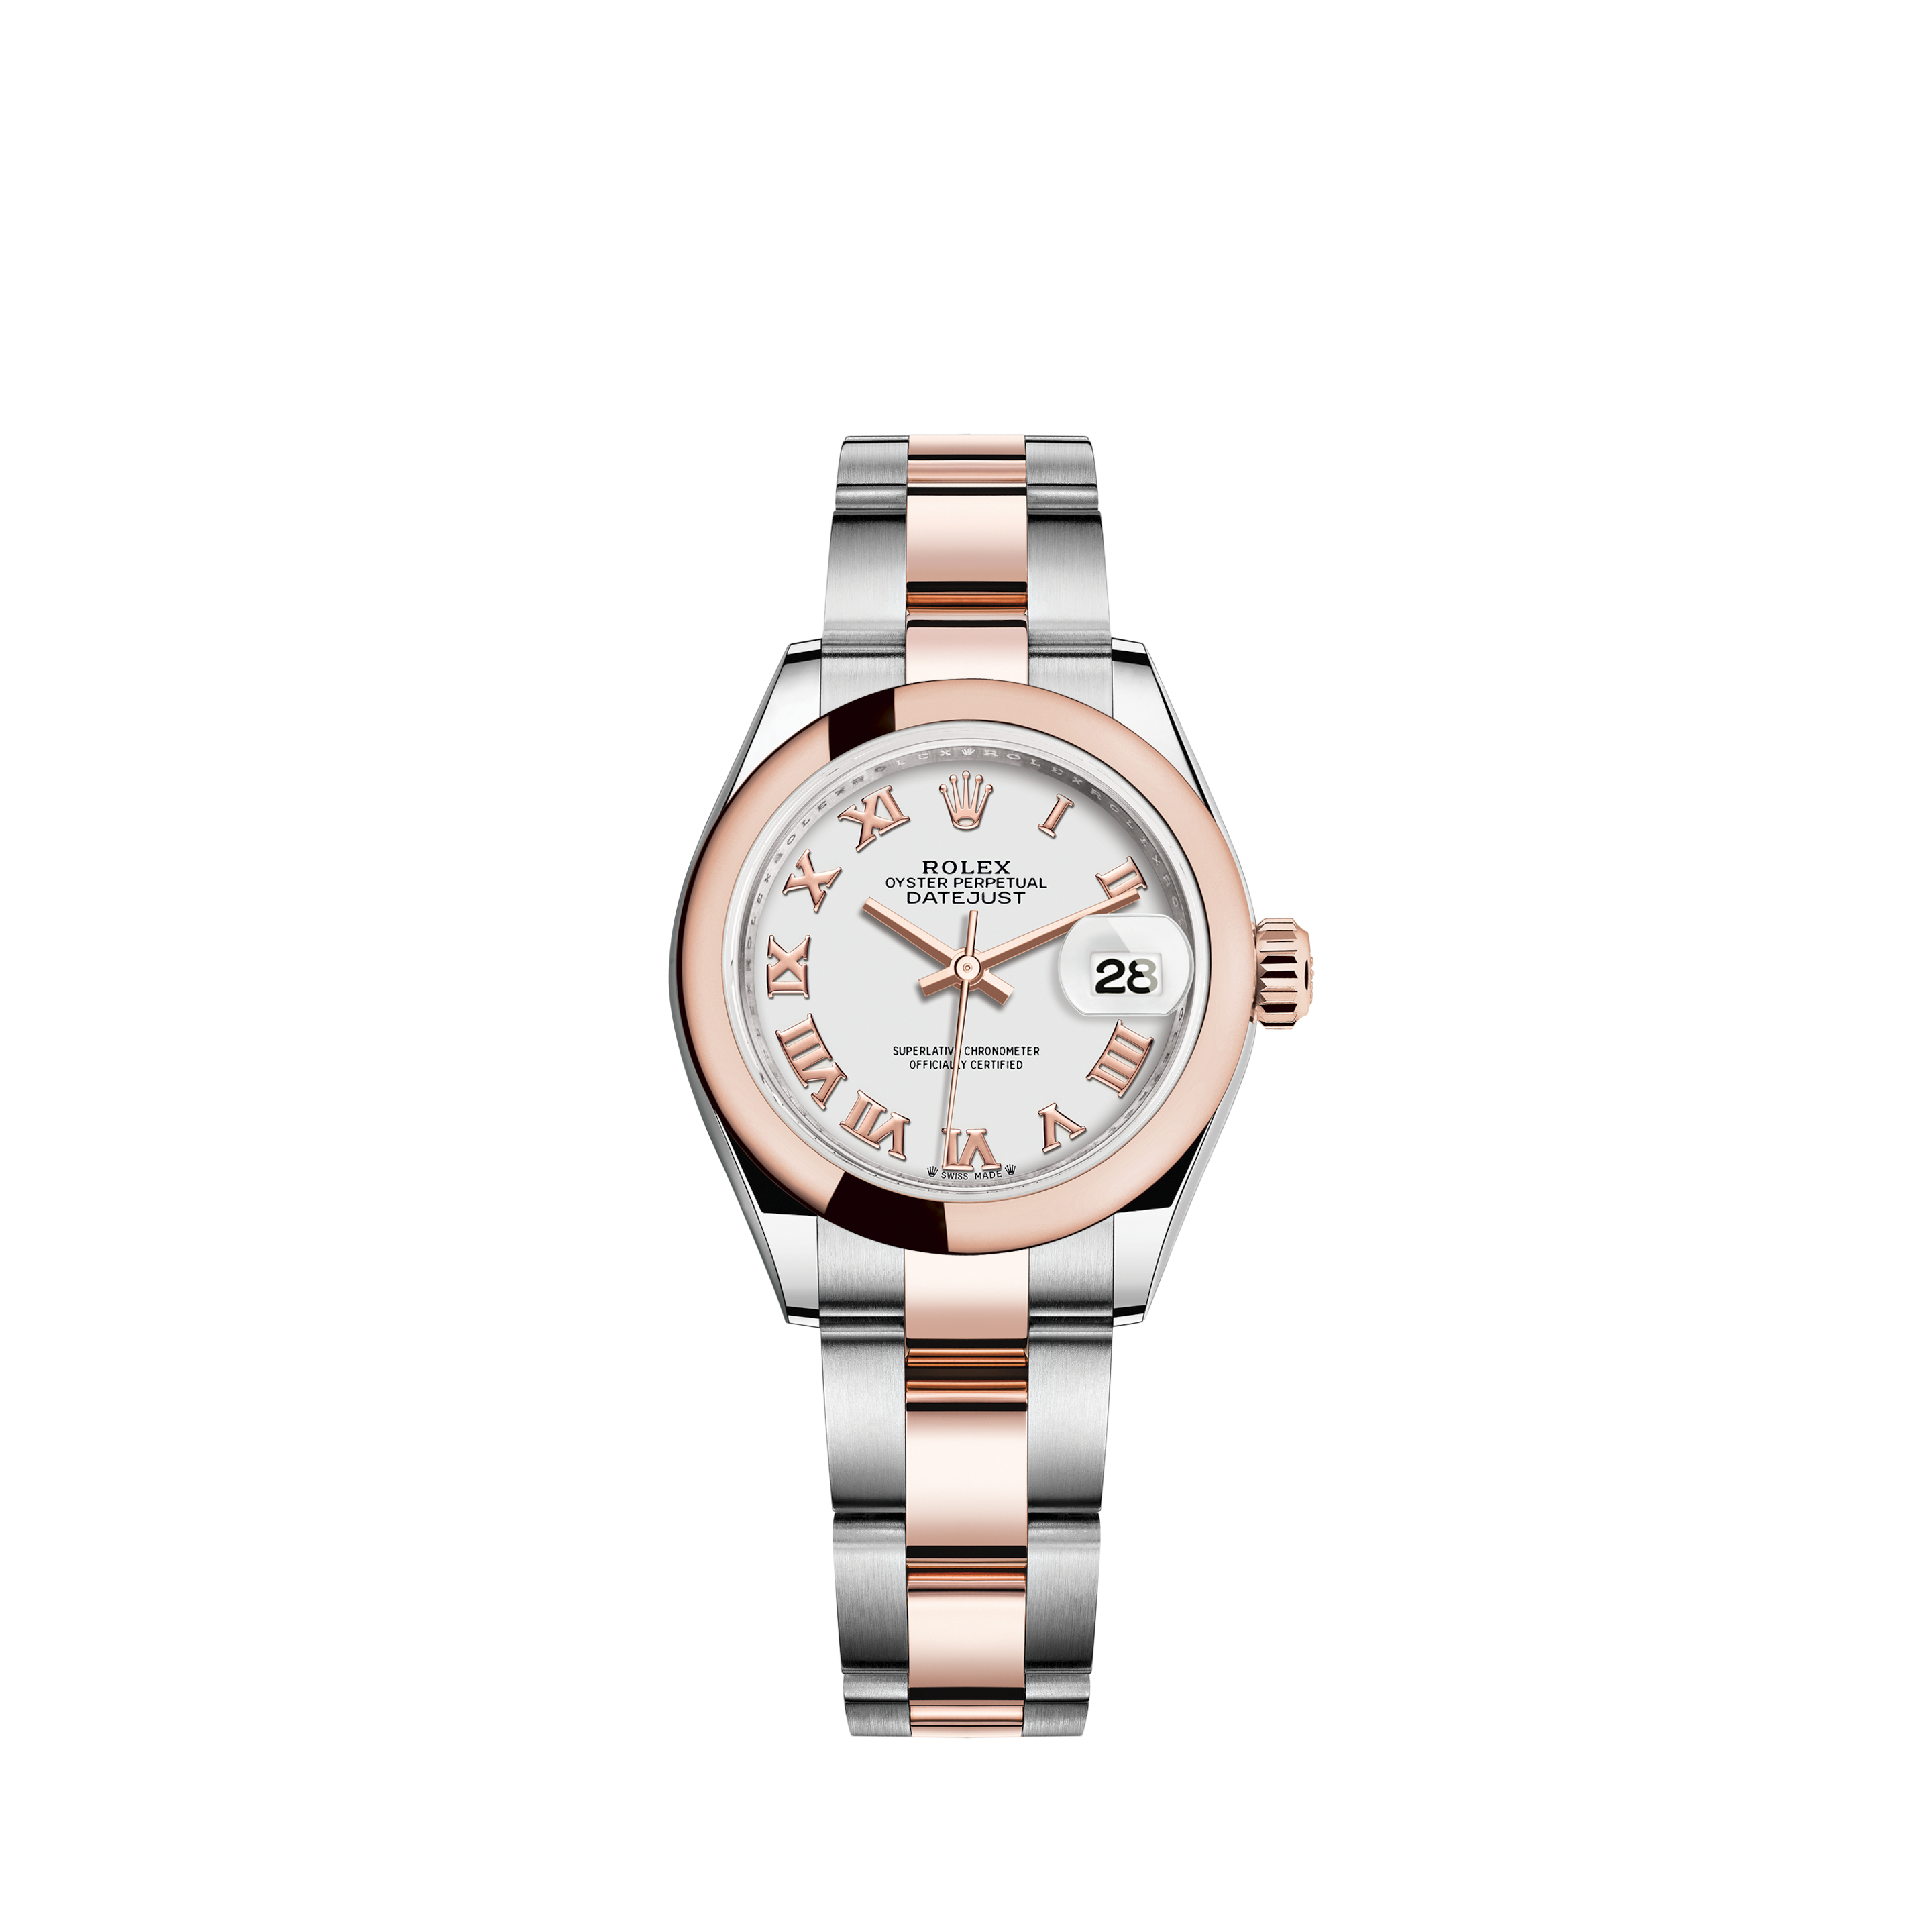 Rolex Datejust 41 Two-Tone Stainless Steel and Rose Gold / Sundust Index Dial / Fluted Bezel / J